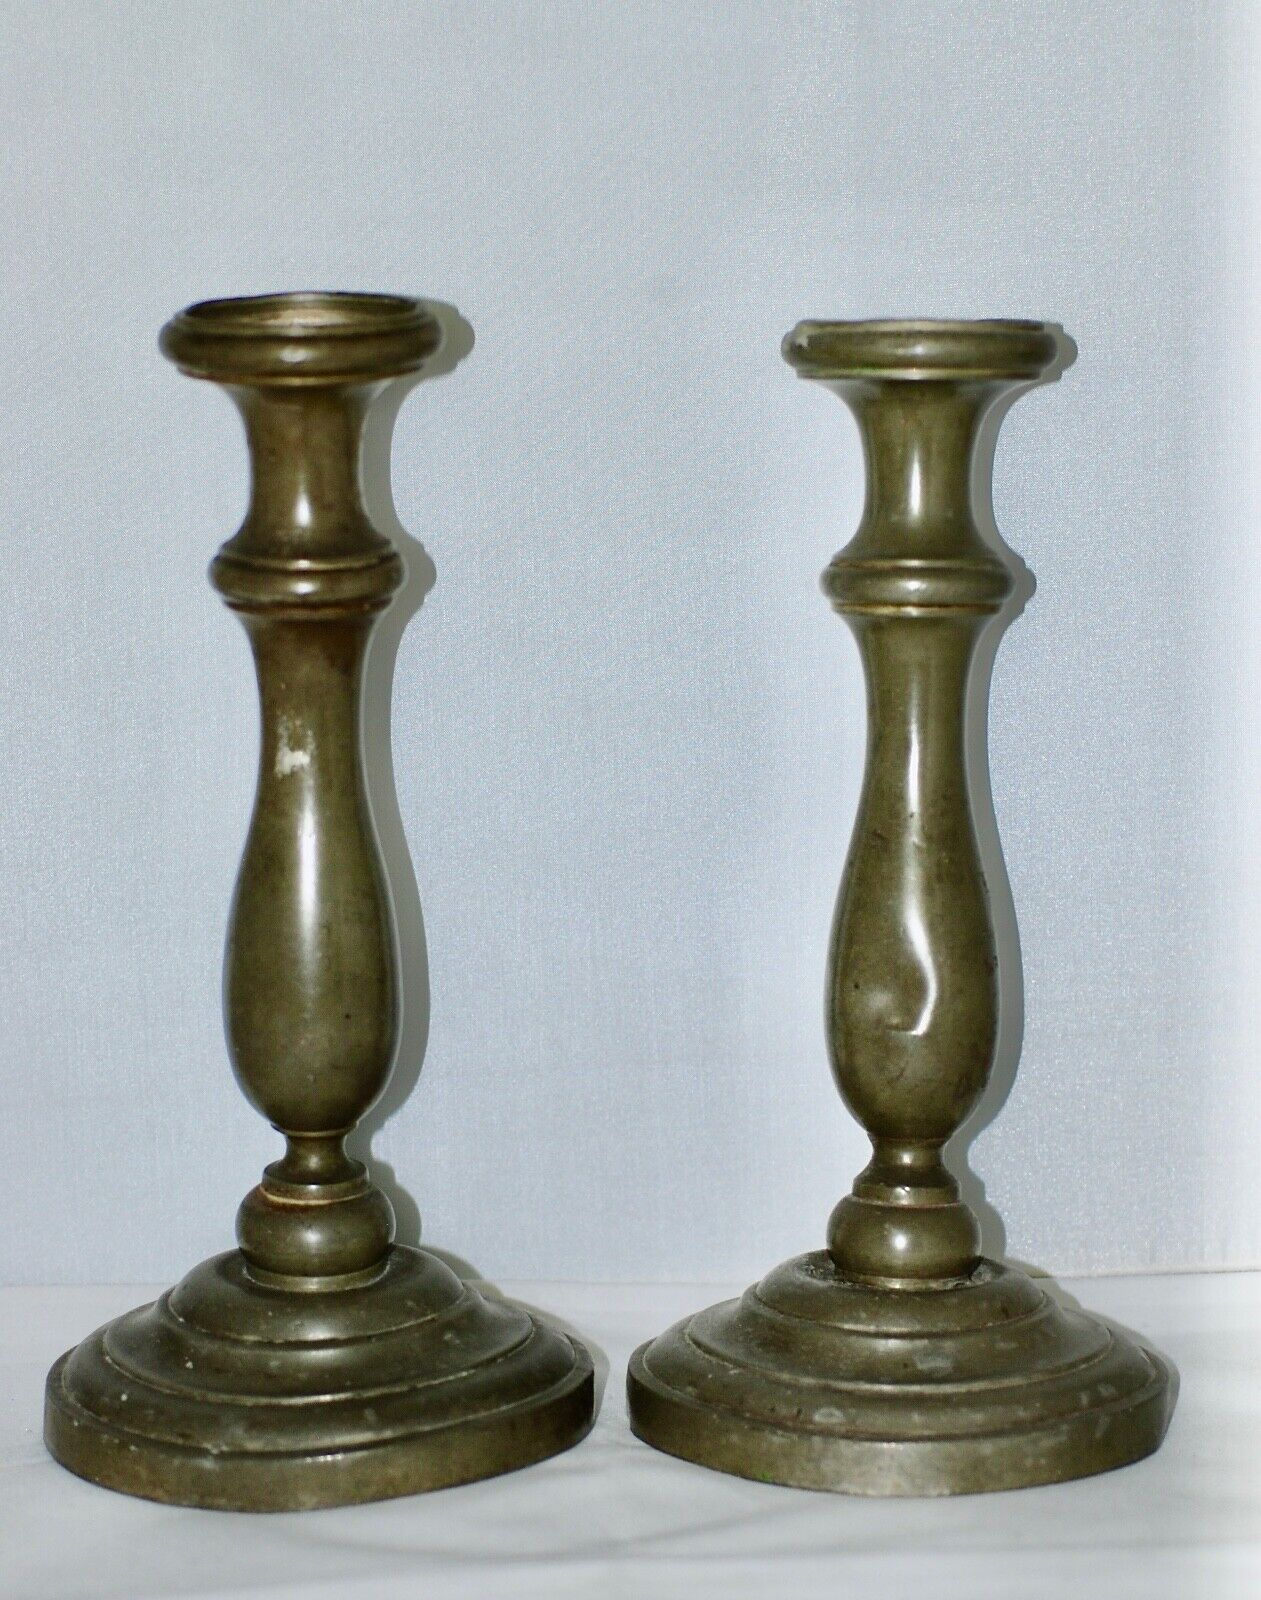 Exceptional Pair of Early American Pewter Candlestick c. 1800s\'